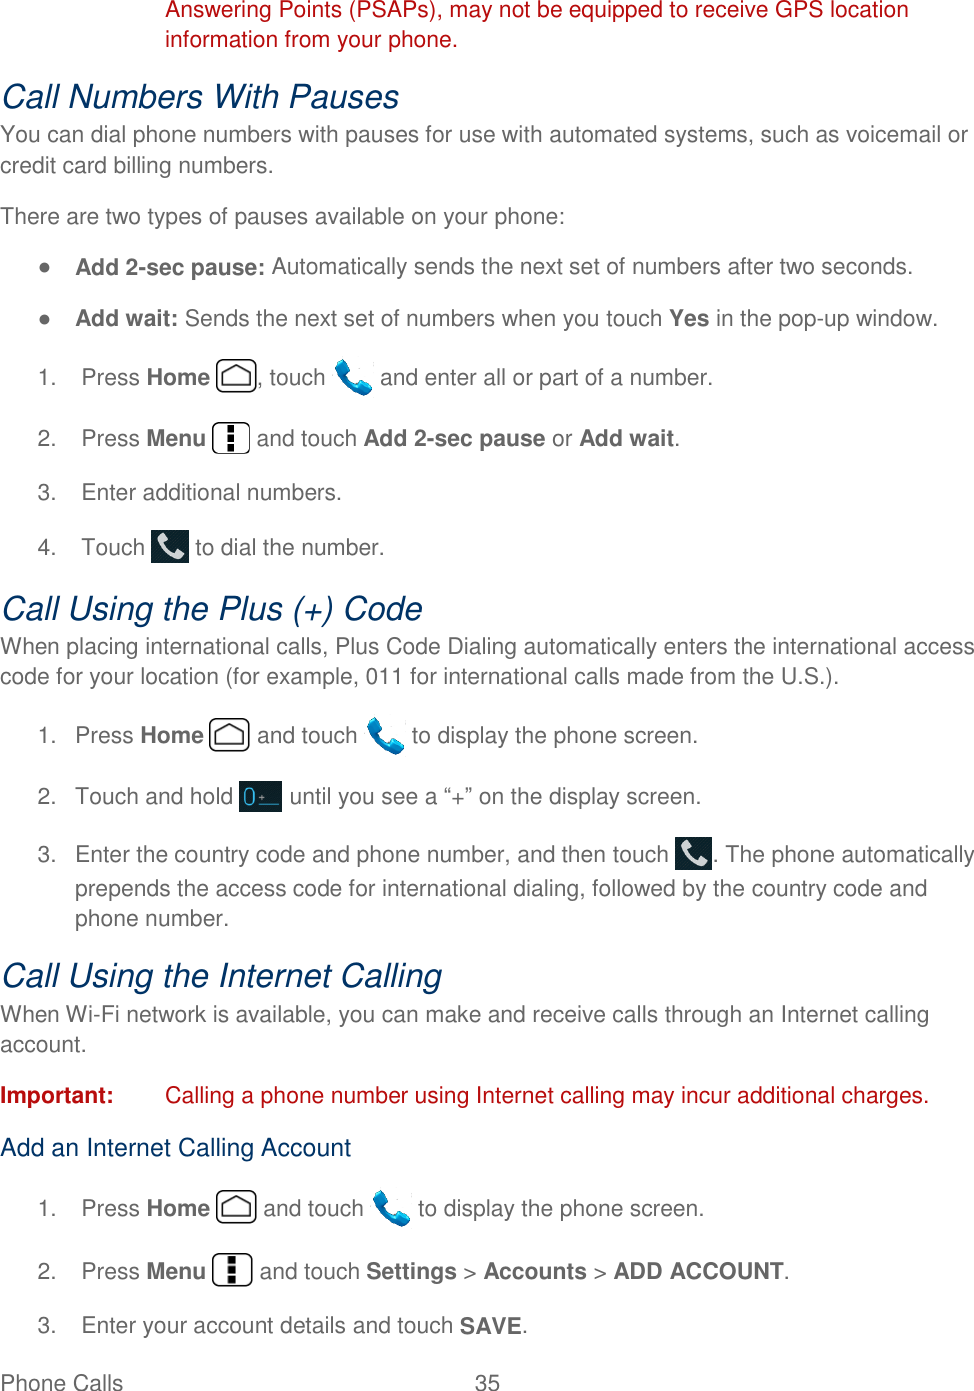  Phone Calls  35   Answering Points (PSAPs), may not be equipped to receive GPS location information from your phone. Call Numbers With Pauses You can dial phone numbers with pauses for use with automated systems, such as voicemail or credit card billing numbers. There are two types of pauses available on your phone: ● Add 2-sec pause: Automatically sends the next set of numbers after two seconds. ● Add wait: Sends the next set of numbers when you touch Yes in the pop-up window. 1.  Press Home  , touch   and enter all or part of a number. 2.  Press Menu   and touch Add 2-sec pause or Add wait. 3.  Enter additional numbers. 4.  Touch   to dial the number. Call Using the Plus (+) Code When placing international calls, Plus Code Dialing automatically enters the international access code for your location (for example, 011 for international calls made from the U.S.). 1.  Press Home   and touch   to display the phone screen. 2.  Touch and hold   until you see a ―+‖ on the display screen. 3.  Enter the country code and phone number, and then touch  . The phone automatically prepends the access code for international dialing, followed by the country code and phone number. Call Using the Internet Calling When Wi-Fi network is available, you can make and receive calls through an Internet calling account.  Important:  Calling a phone number using Internet calling may incur additional charges.  Add an Internet Calling Account 1.  Press Home   and touch   to display the phone screen. 2.  Press Menu   and touch Settings &gt; Accounts &gt; ADD ACCOUNT.  3.  Enter your account details and touch SAVE. 